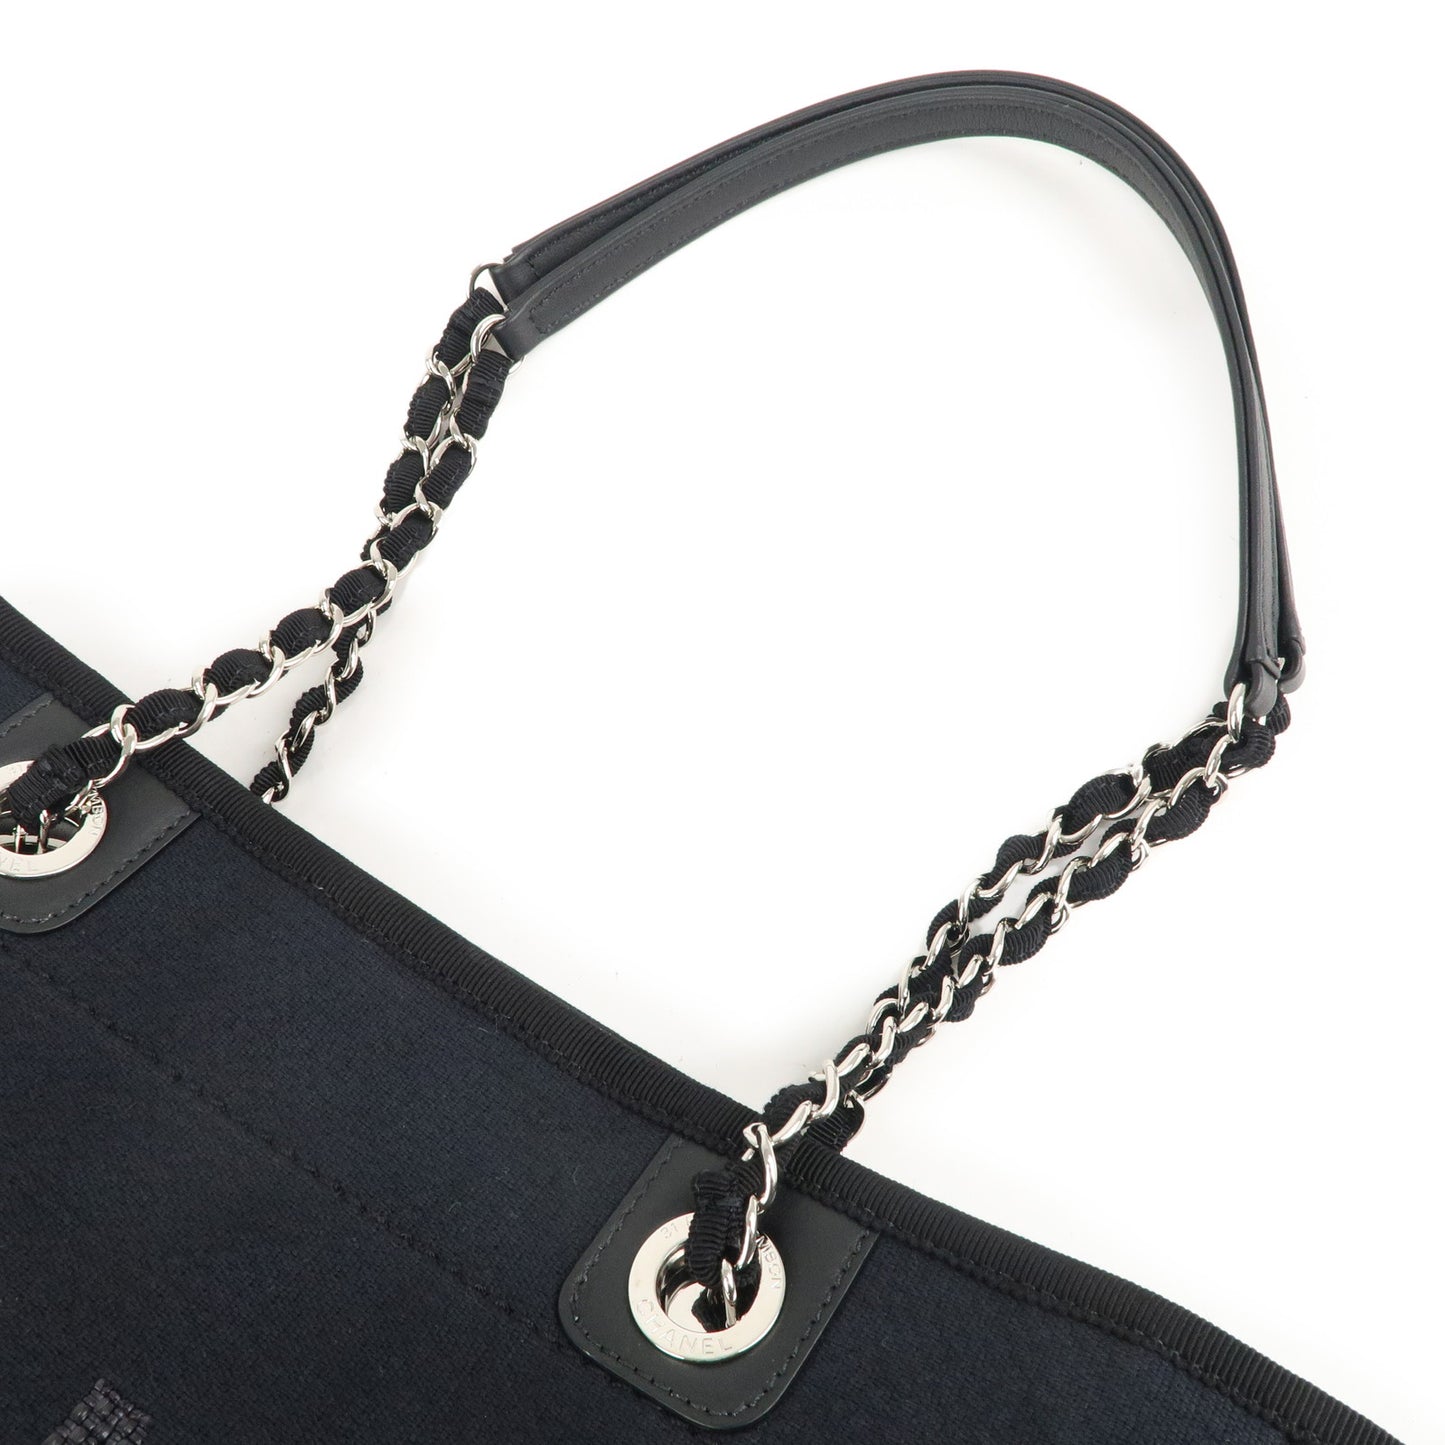 CHANEL Deauville Canvas Leather Chain Tote Bag Black A67001